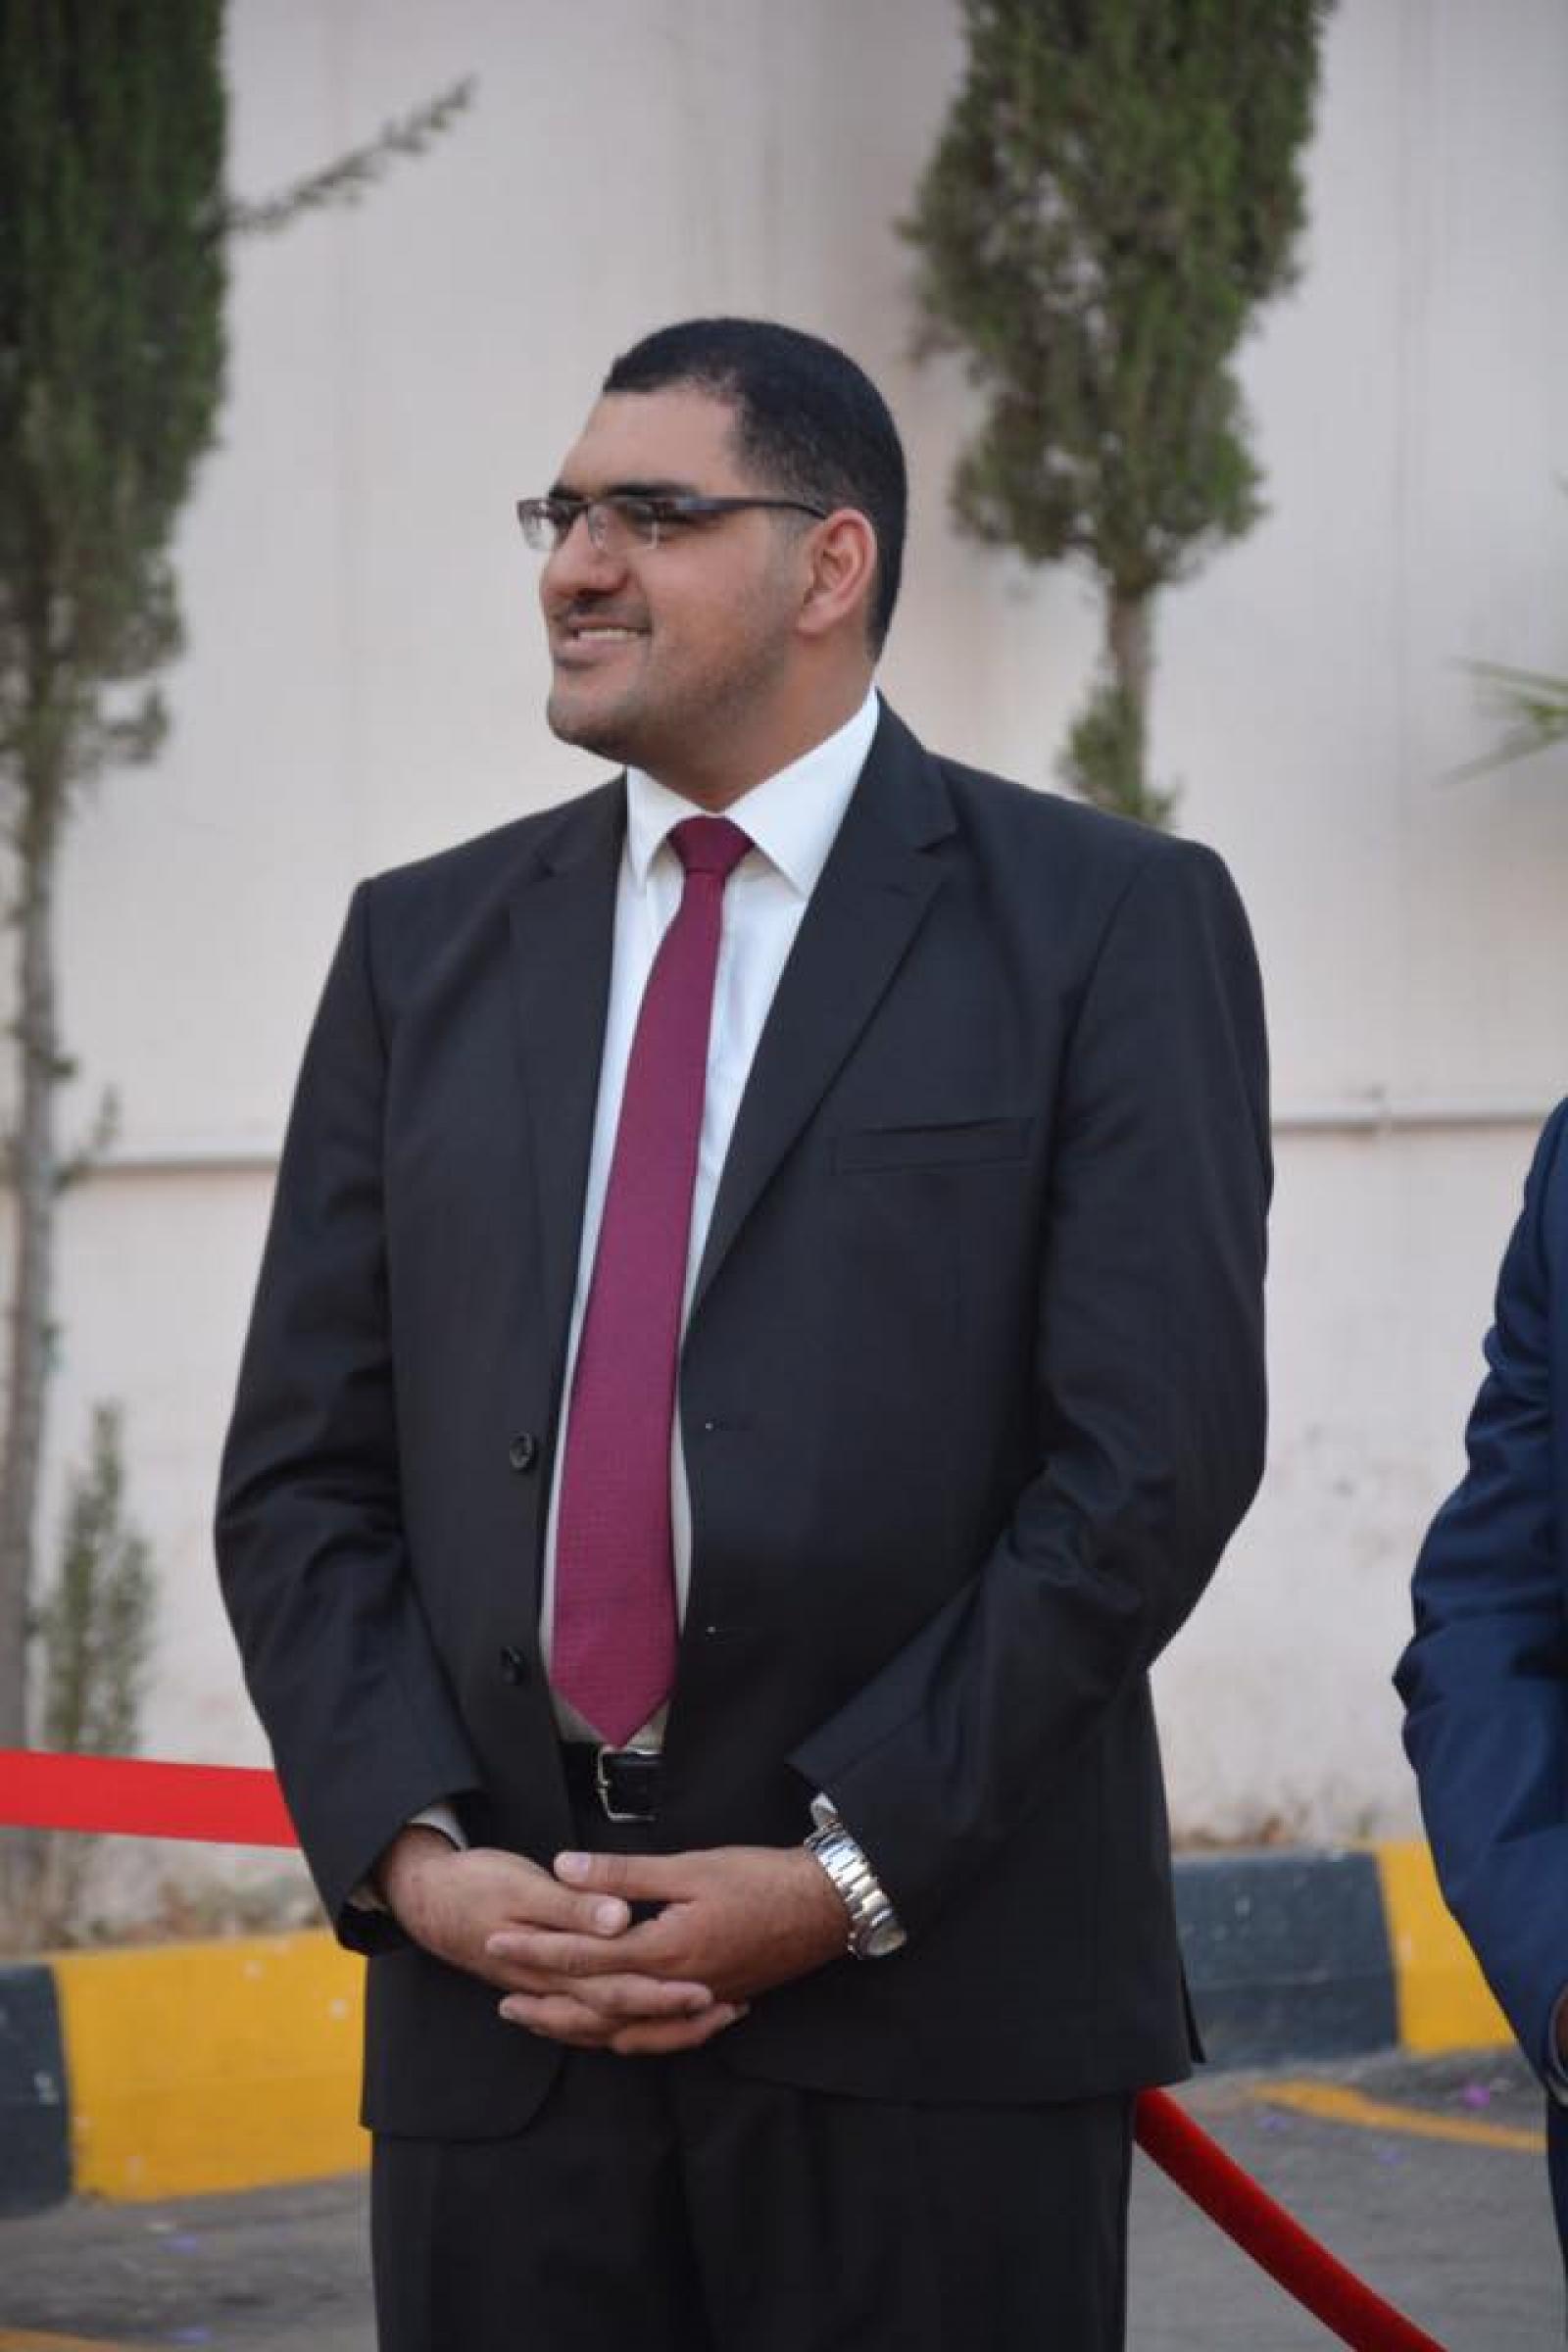 Under the patronage of His Excellency Dr. Nayef Al-Fayez, Chairman of the Board of Directors, Al-Istiklal Hospital held a ceremony for the Independenc